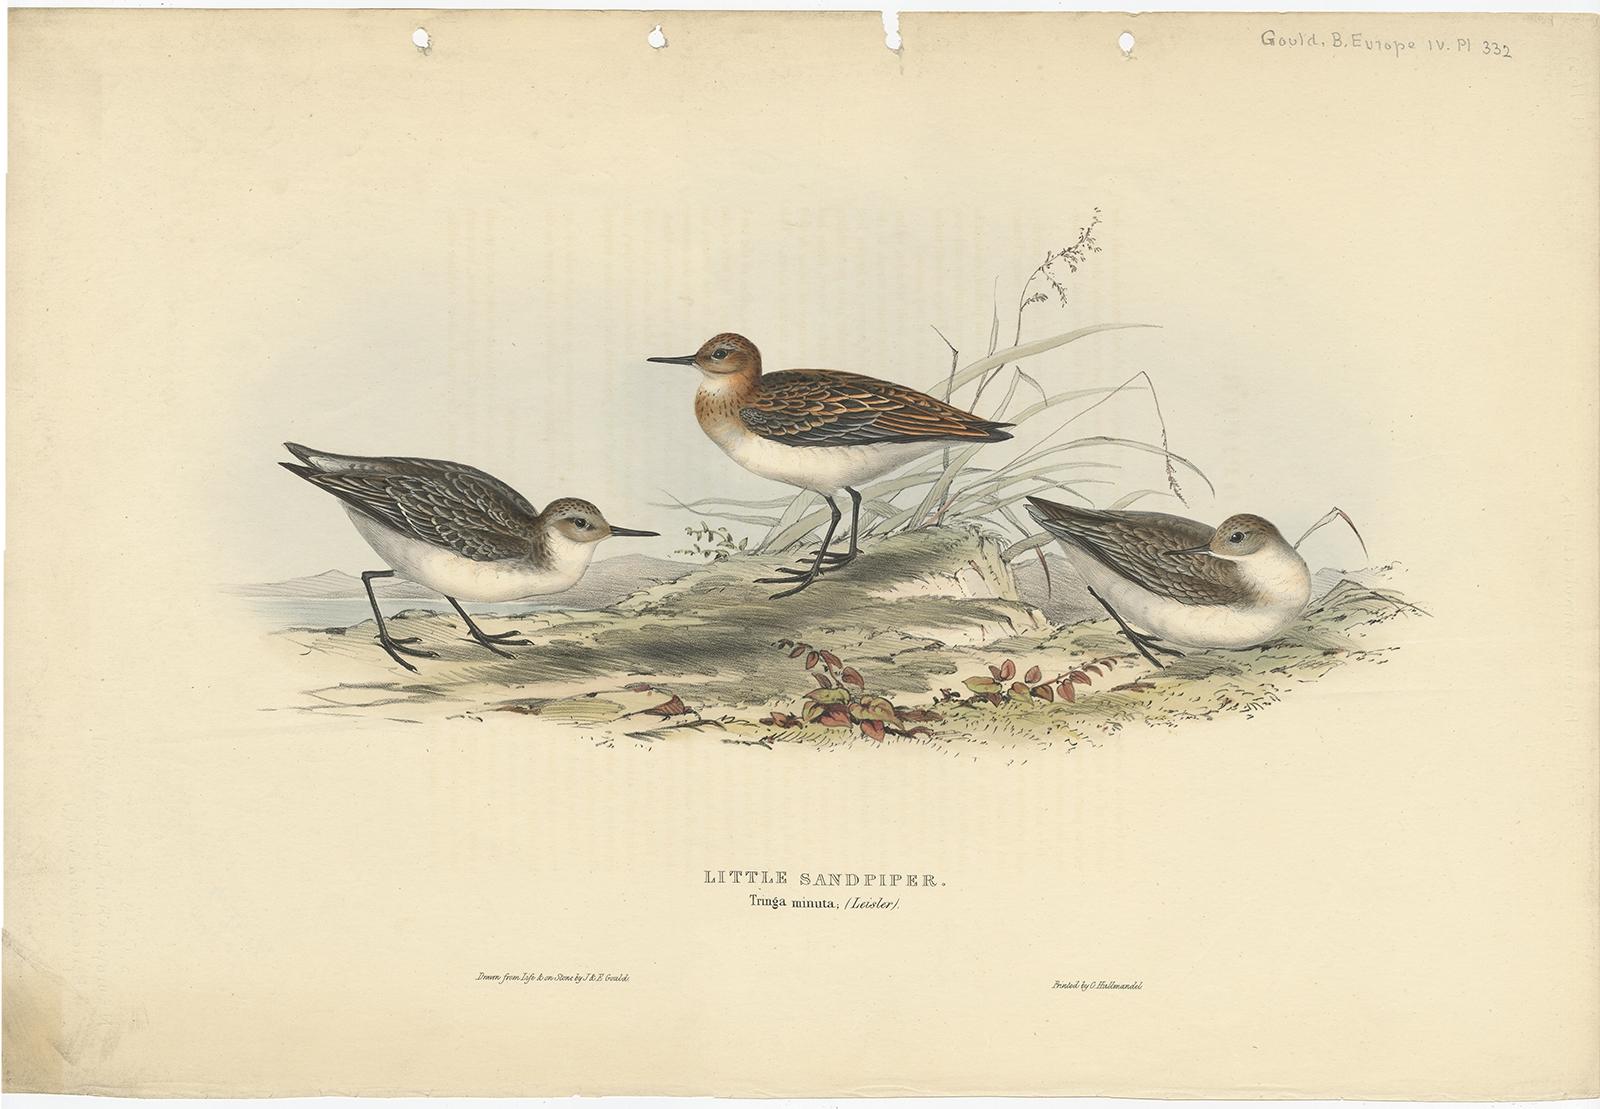 Antique bird print titled 'Little Sandpiper'. Old bird print depicting three little sandpiper. This print originates from 'Birds of Europe' by J. Gould (1832-1837).

Artists and Engravers: John Gould (1804 - 1881) was an English ornithologist and